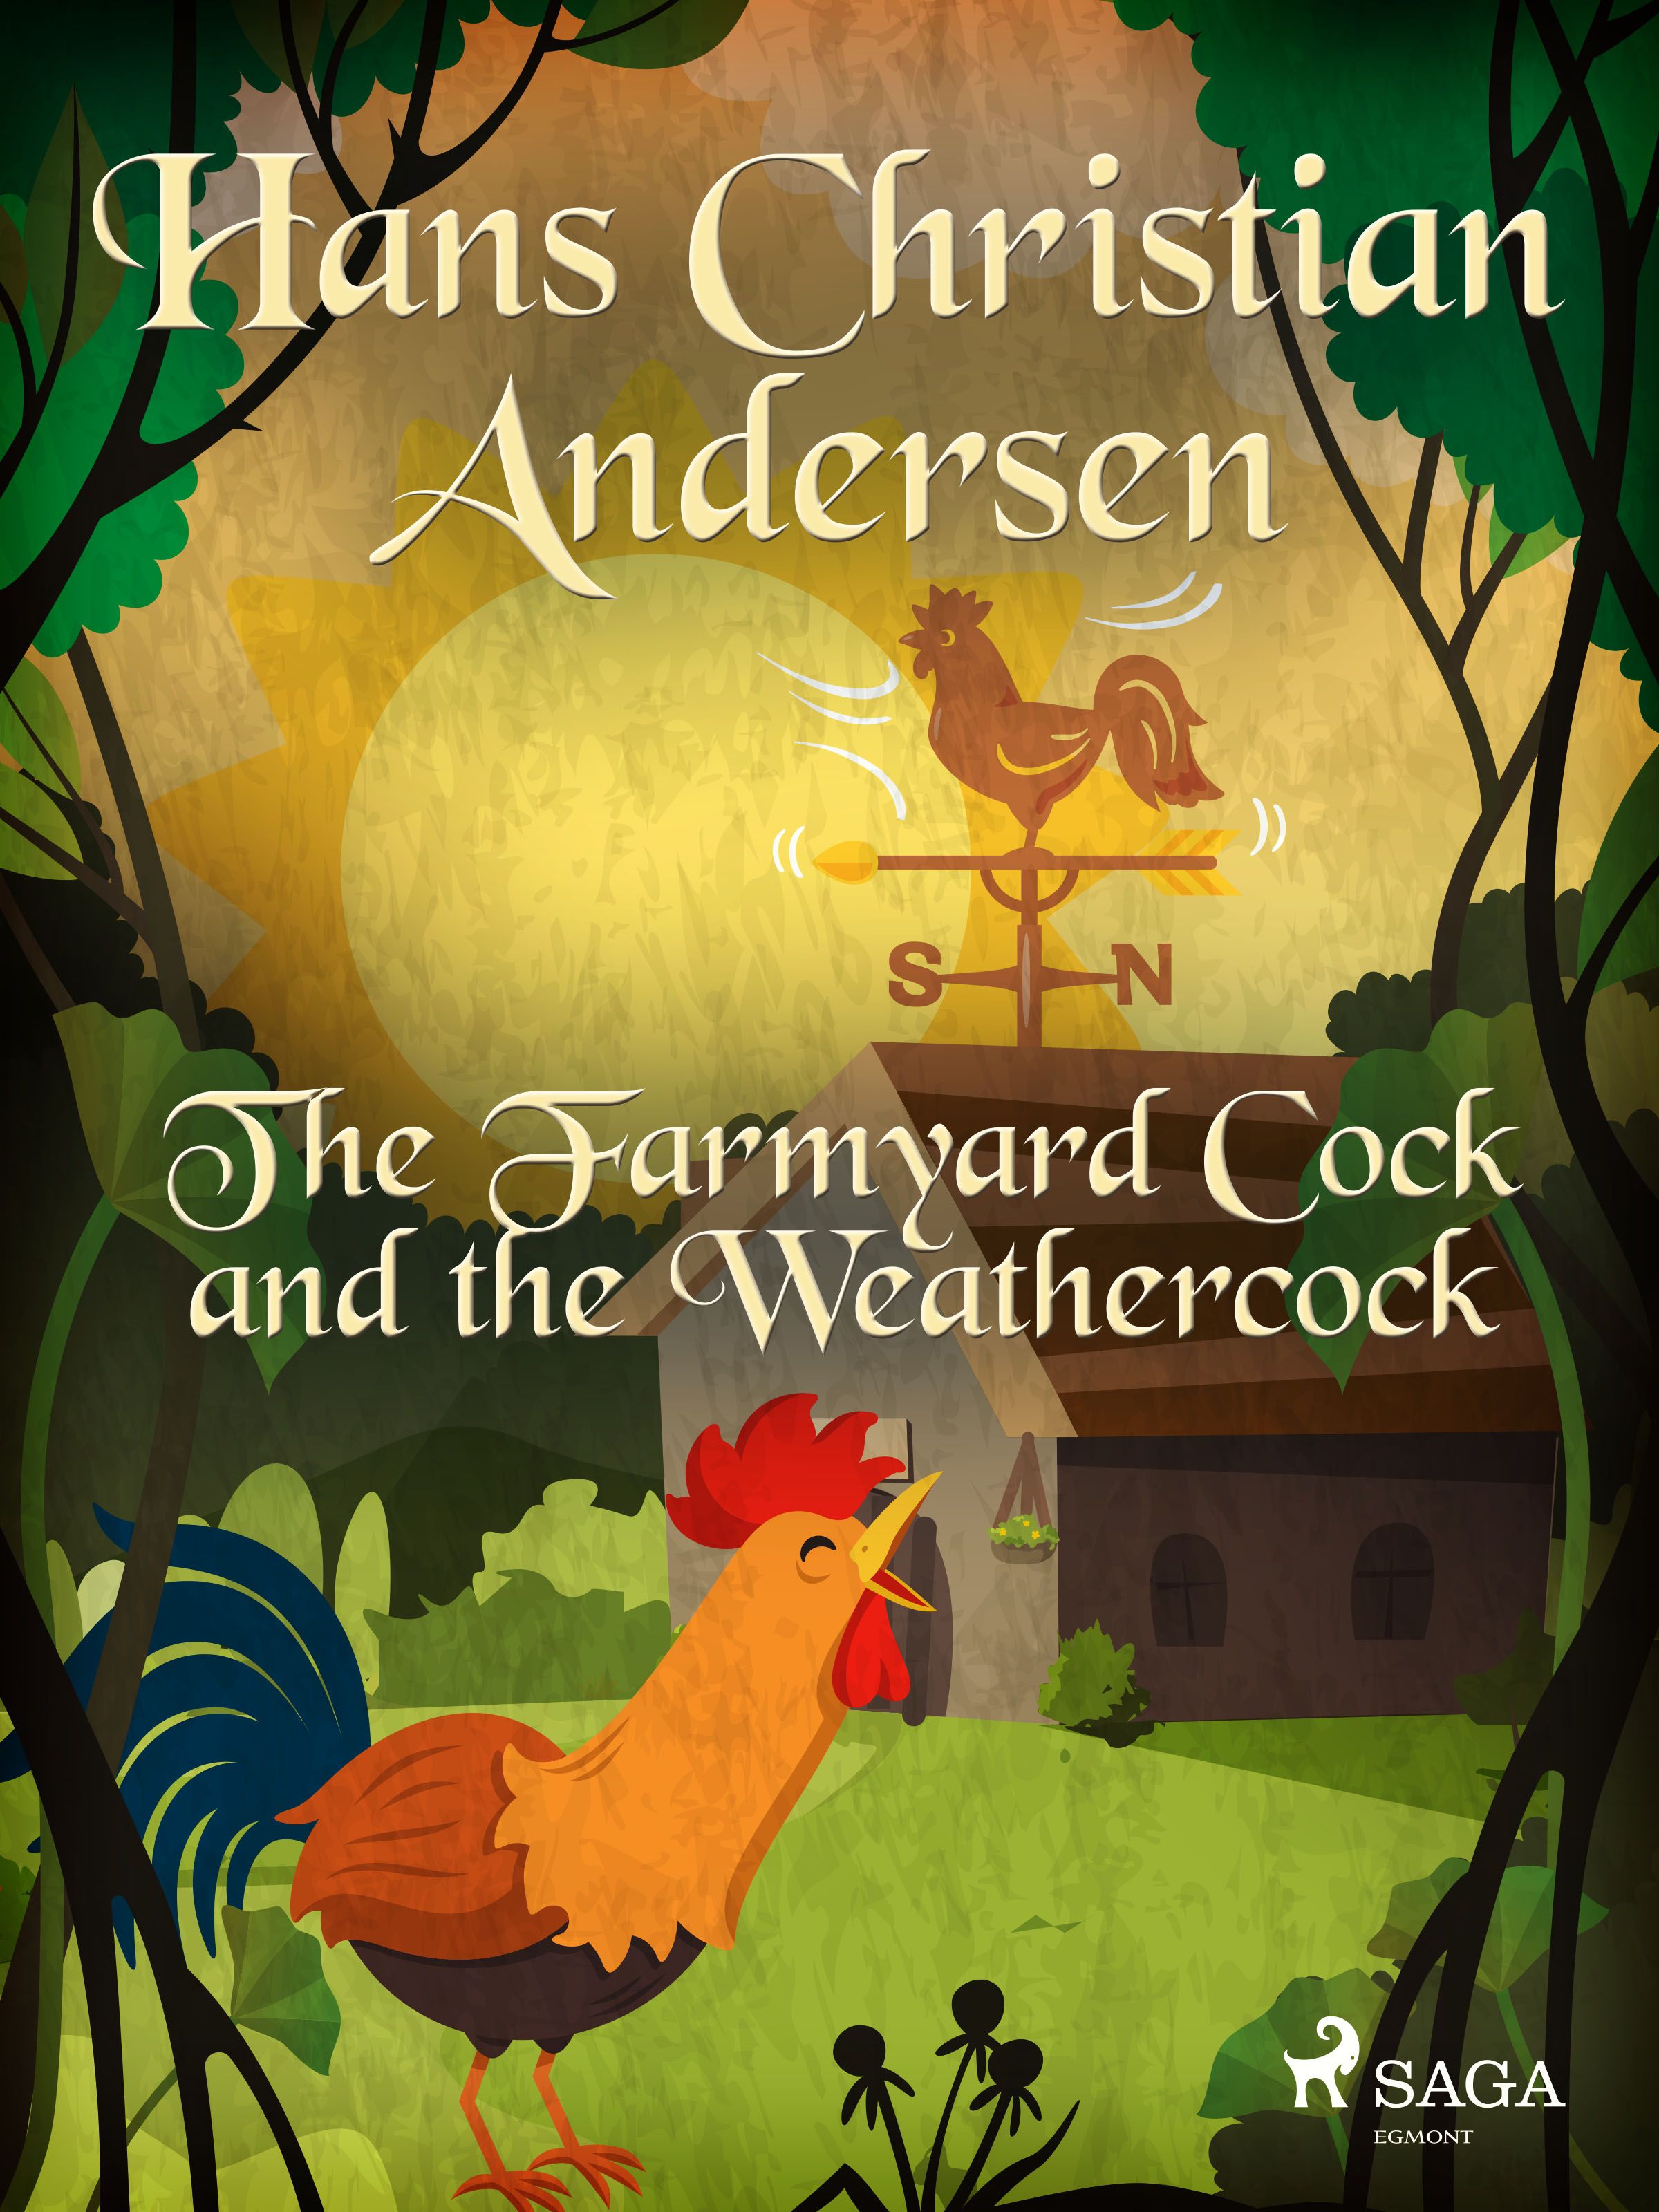 The Farmyard Cock and the Weathercock , e-bog af Hans Christian Andersen